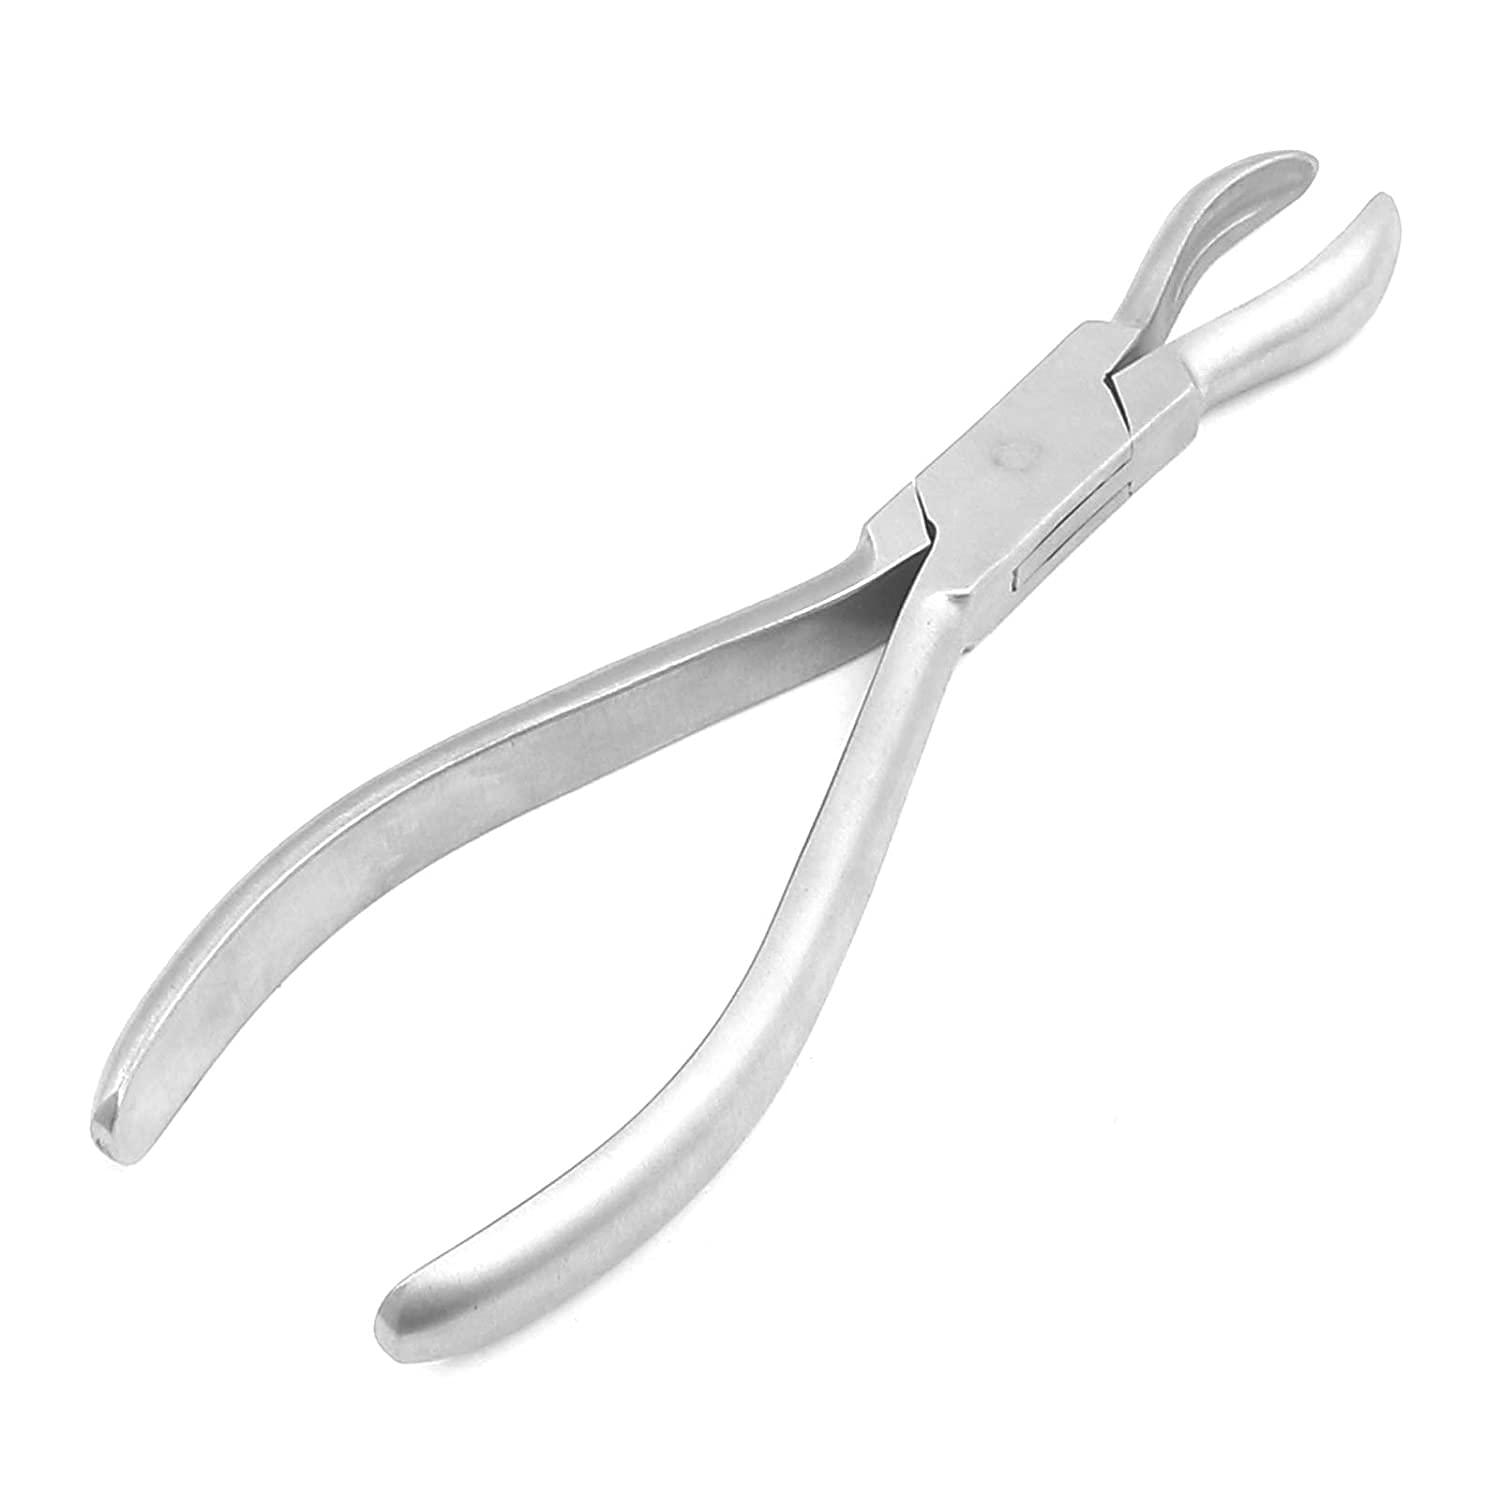 G.S ONLINE STORE g.s ring closing pliers large cup jaw